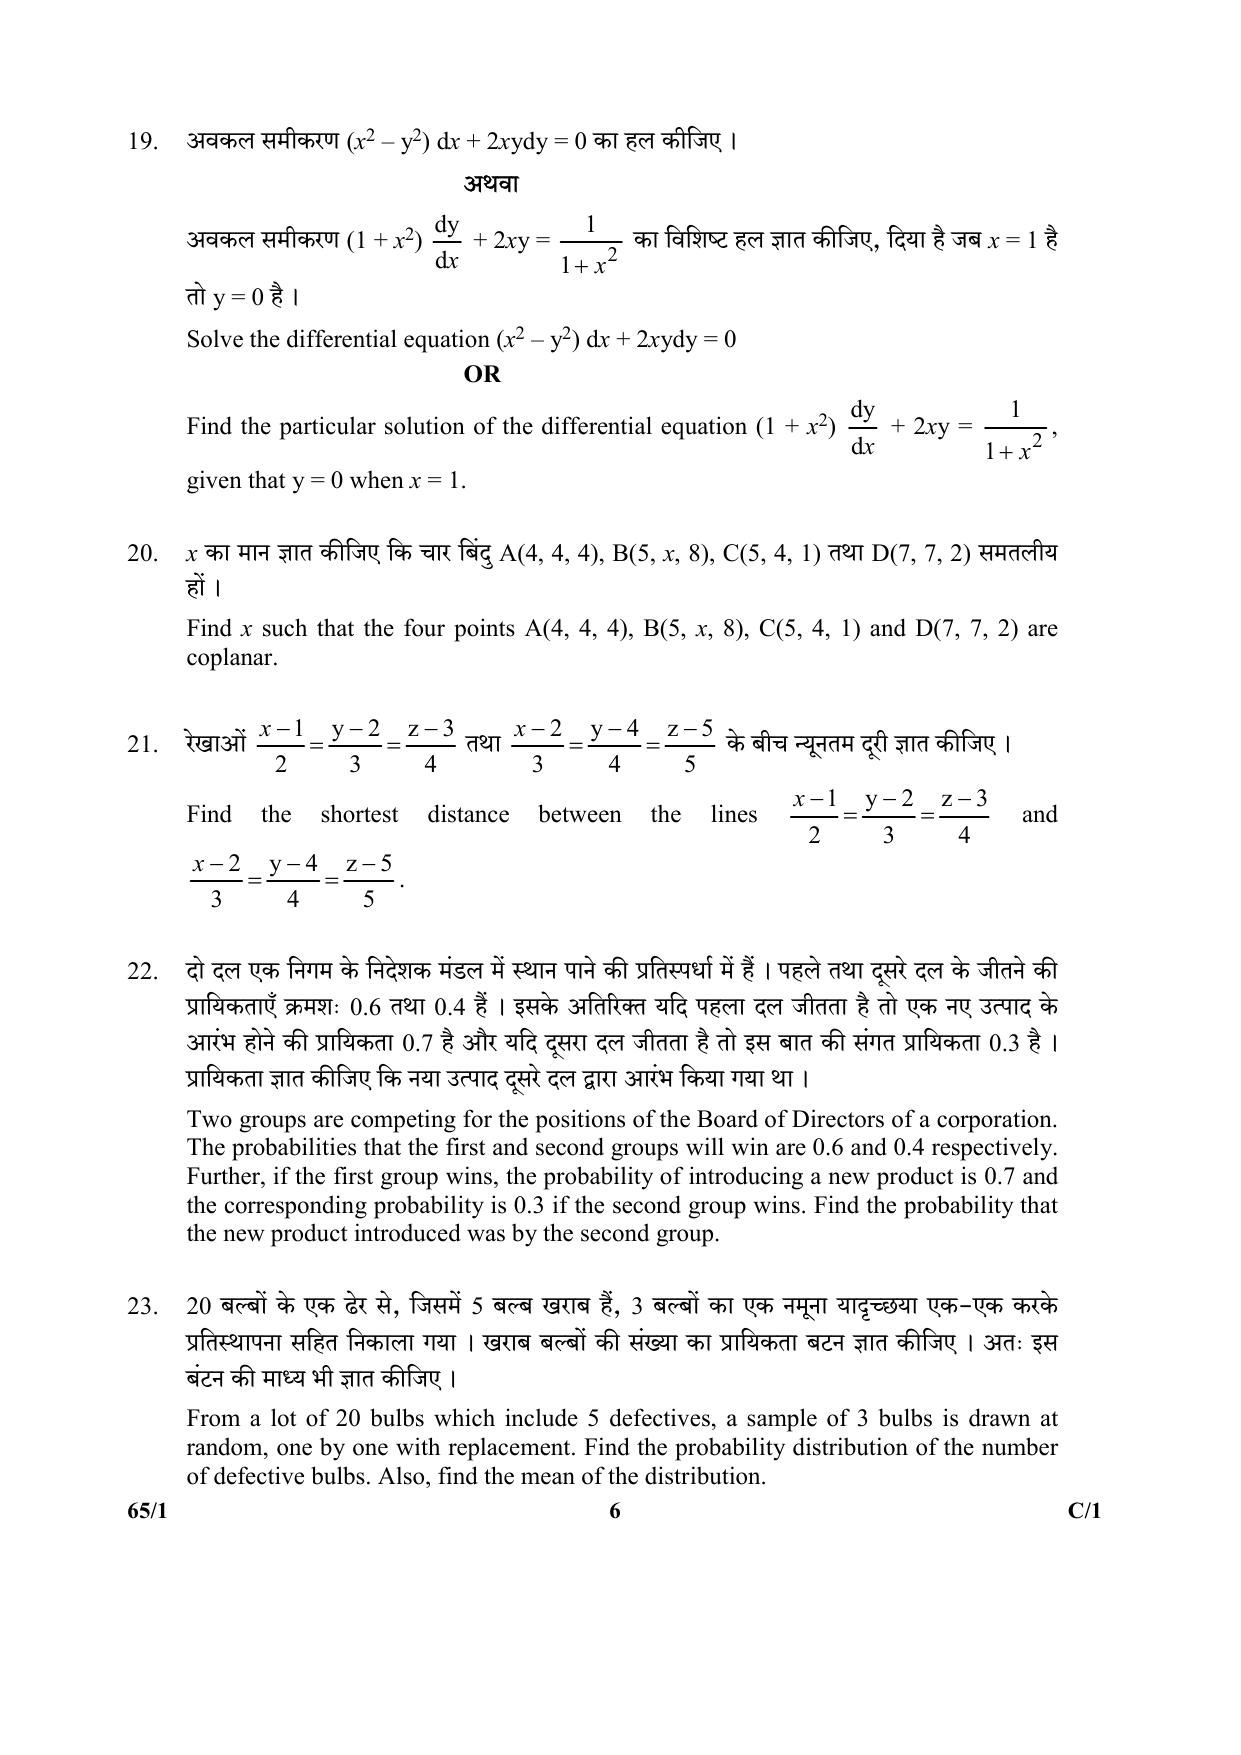 CBSE Class 12 65-1 (Mathematics) 2018 Compartment Question Paper - Page 6